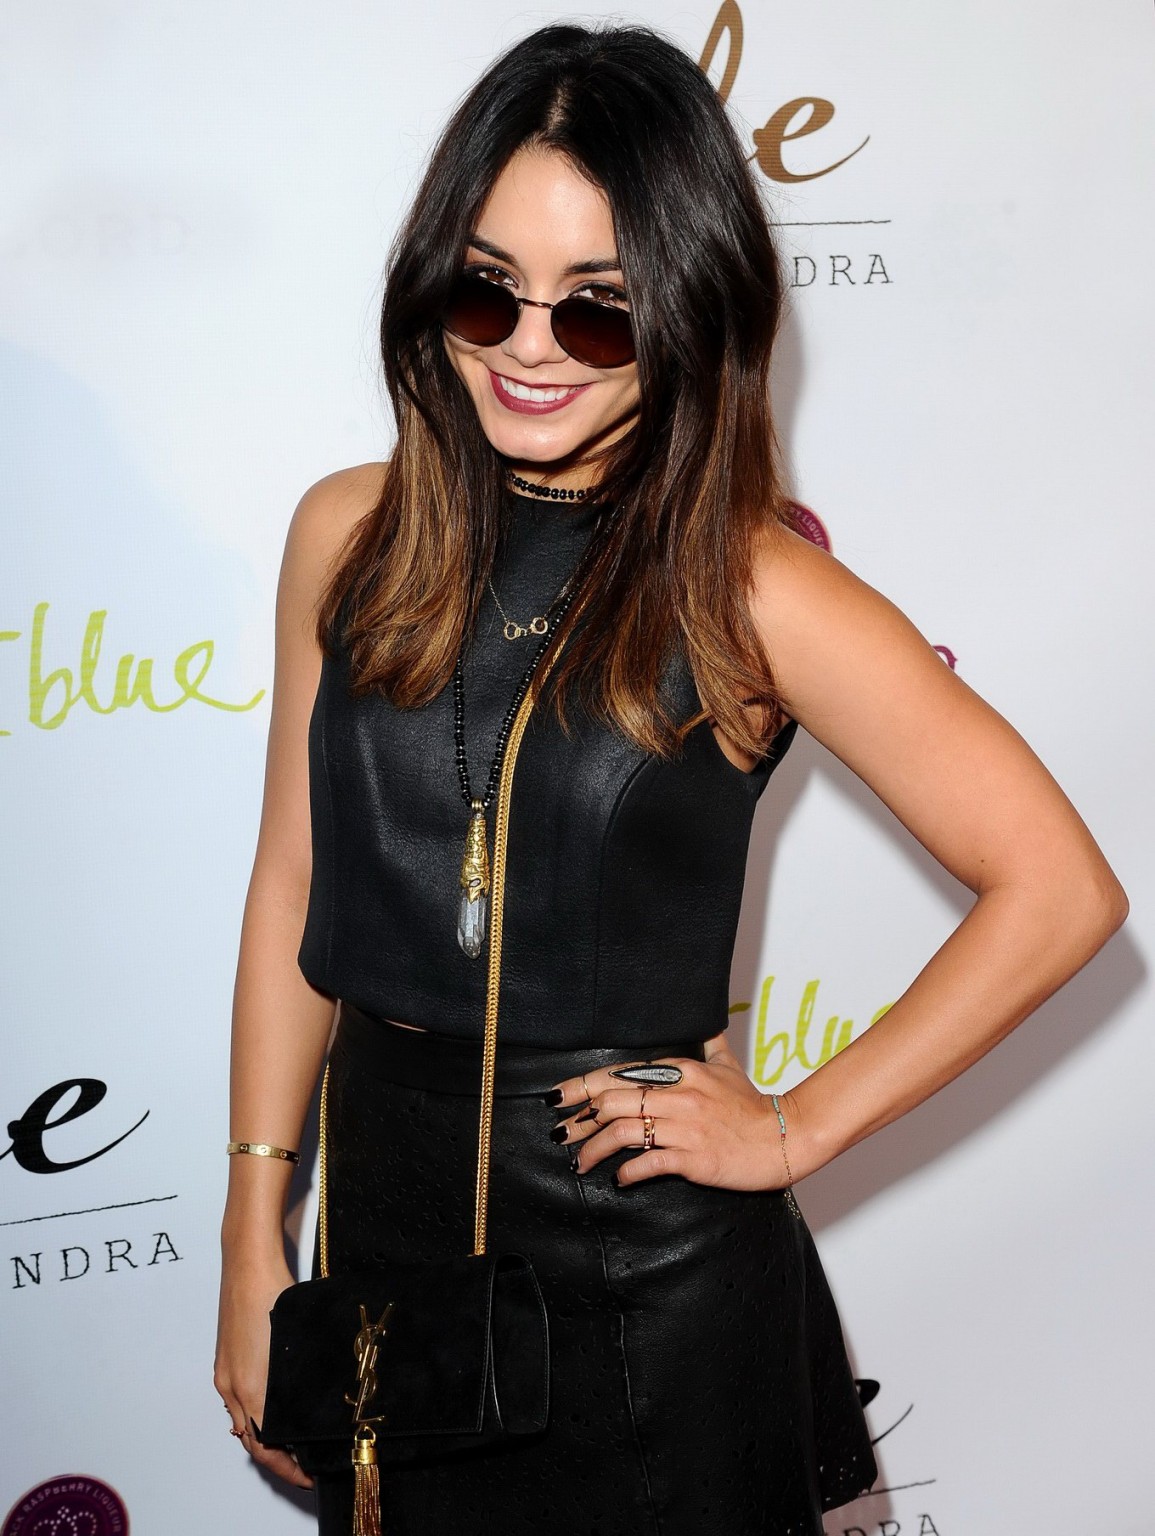 Vanessa Hudgens wearing tiny black leather outfit at Ale by Alessandra Collectio #75201647